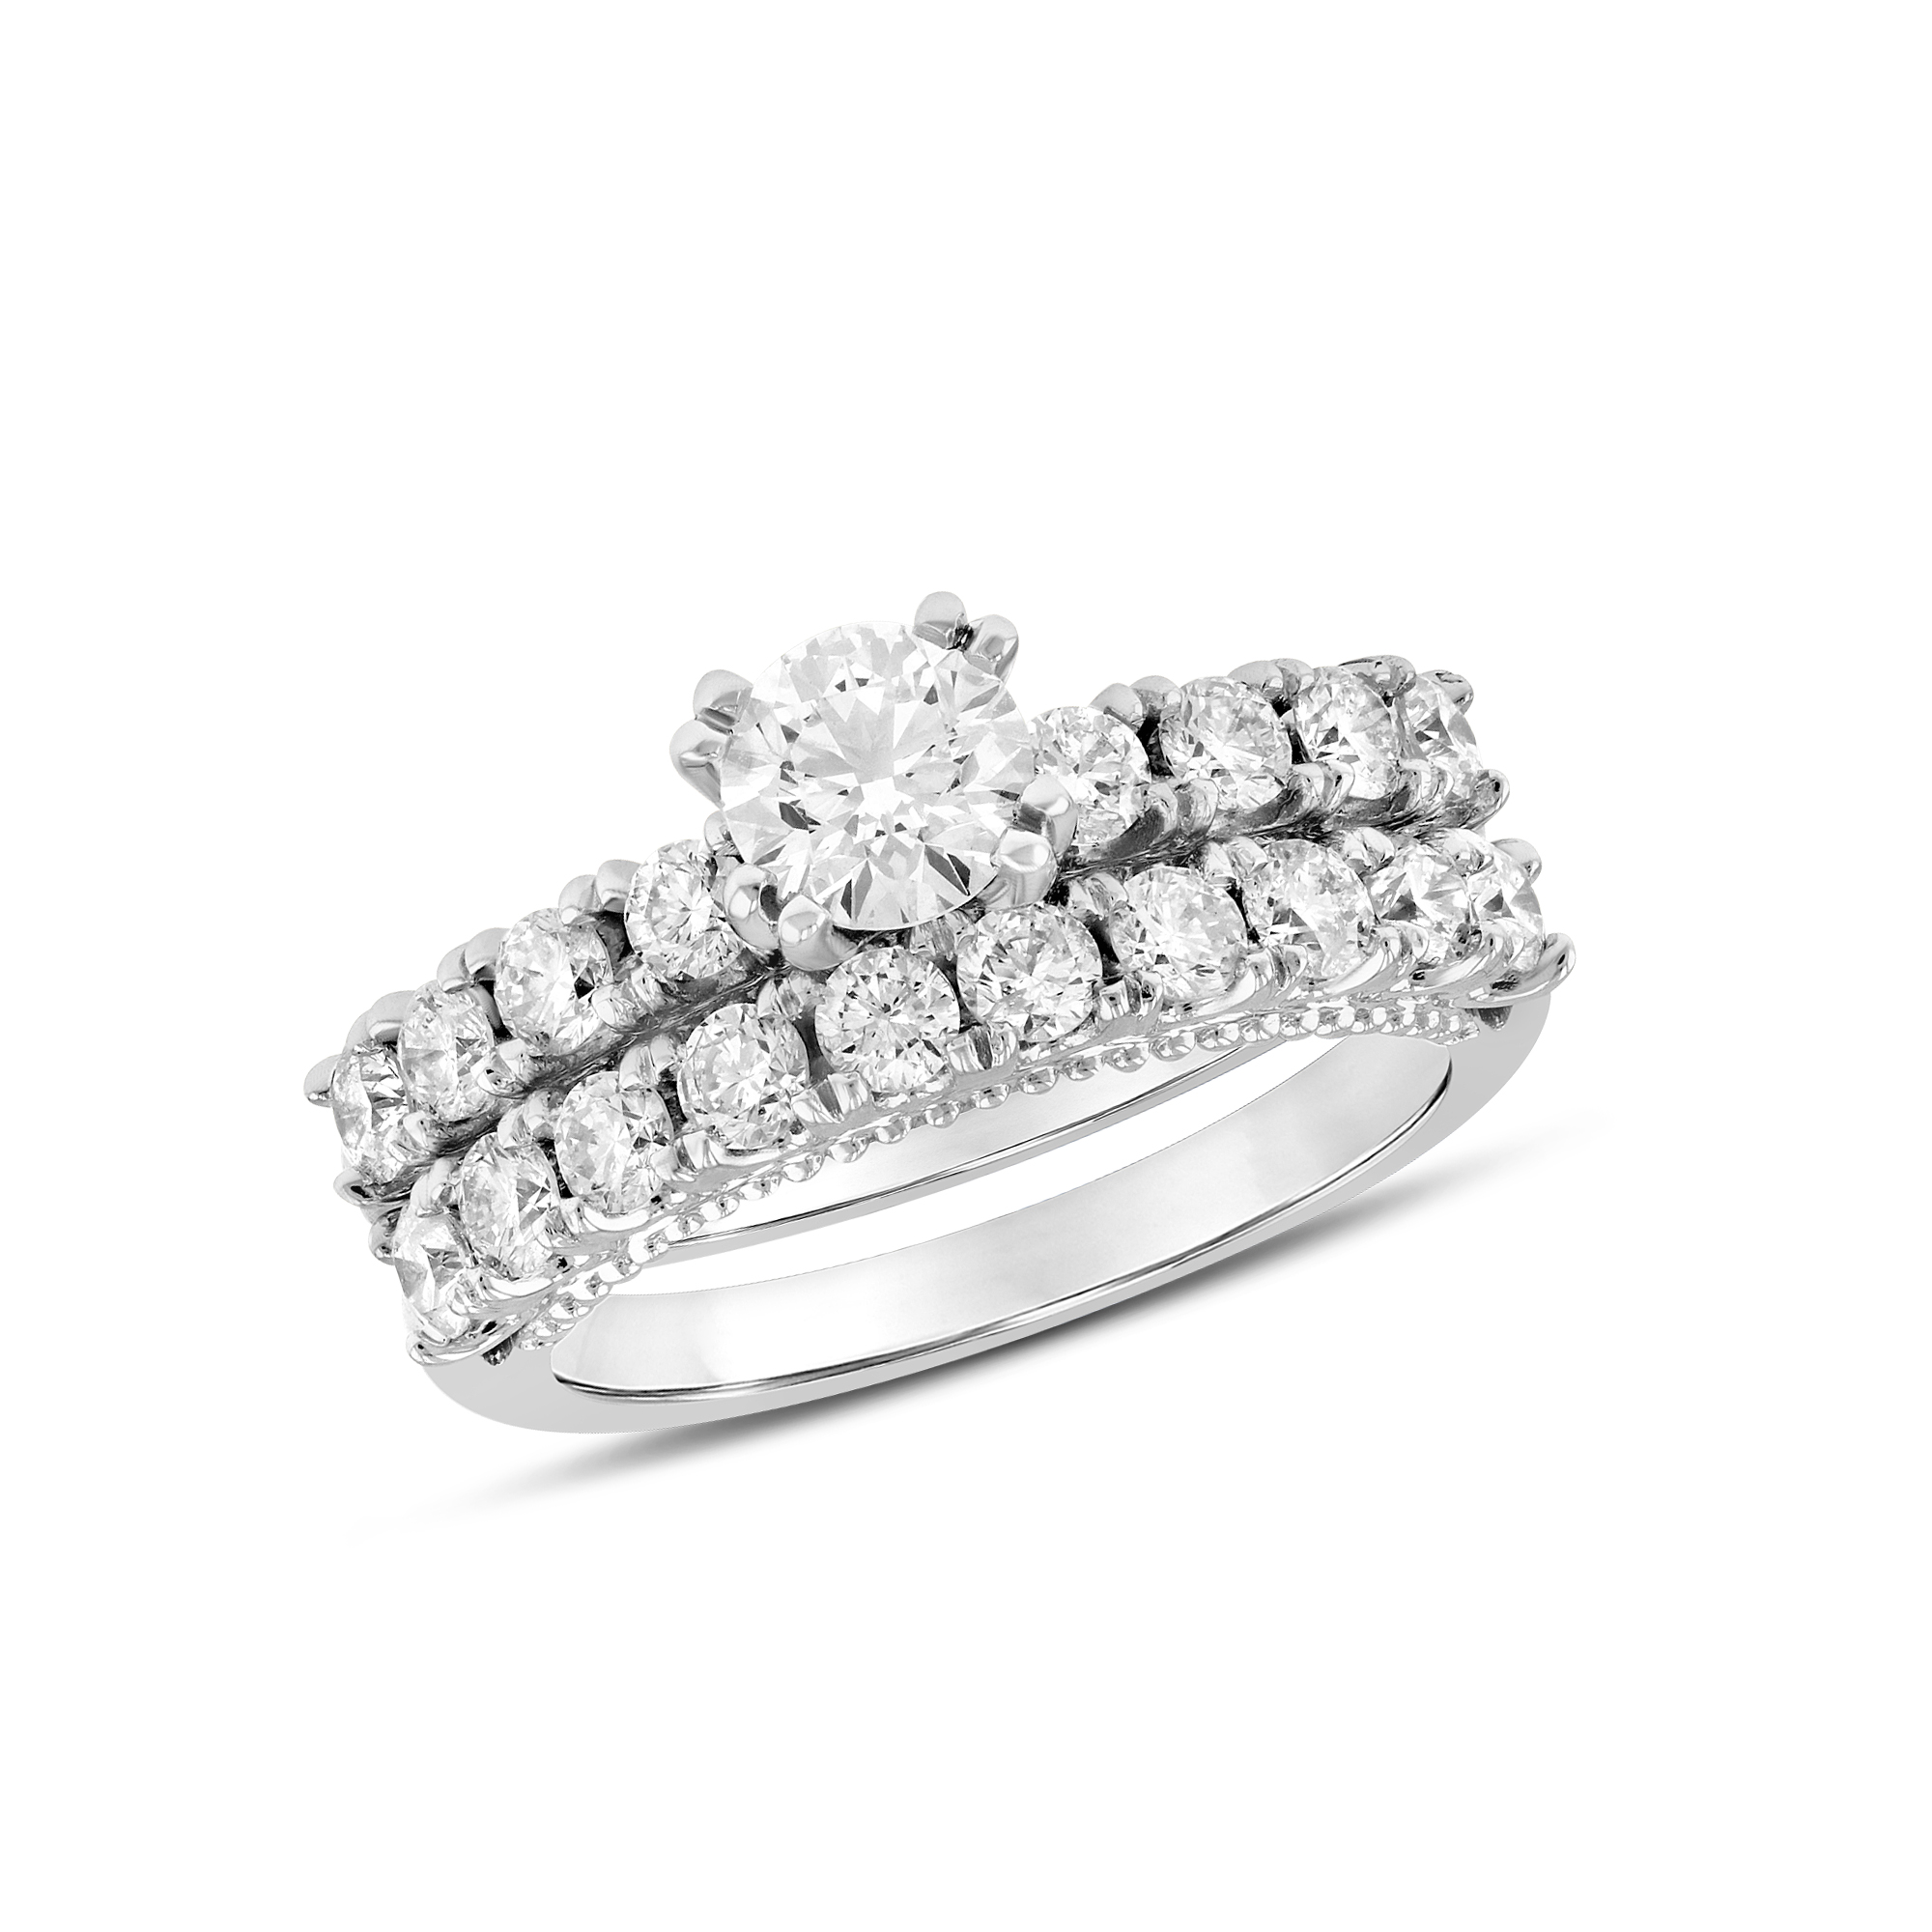 View 1.95ctw Diamond Engagement Ring Set in 14k White Gold